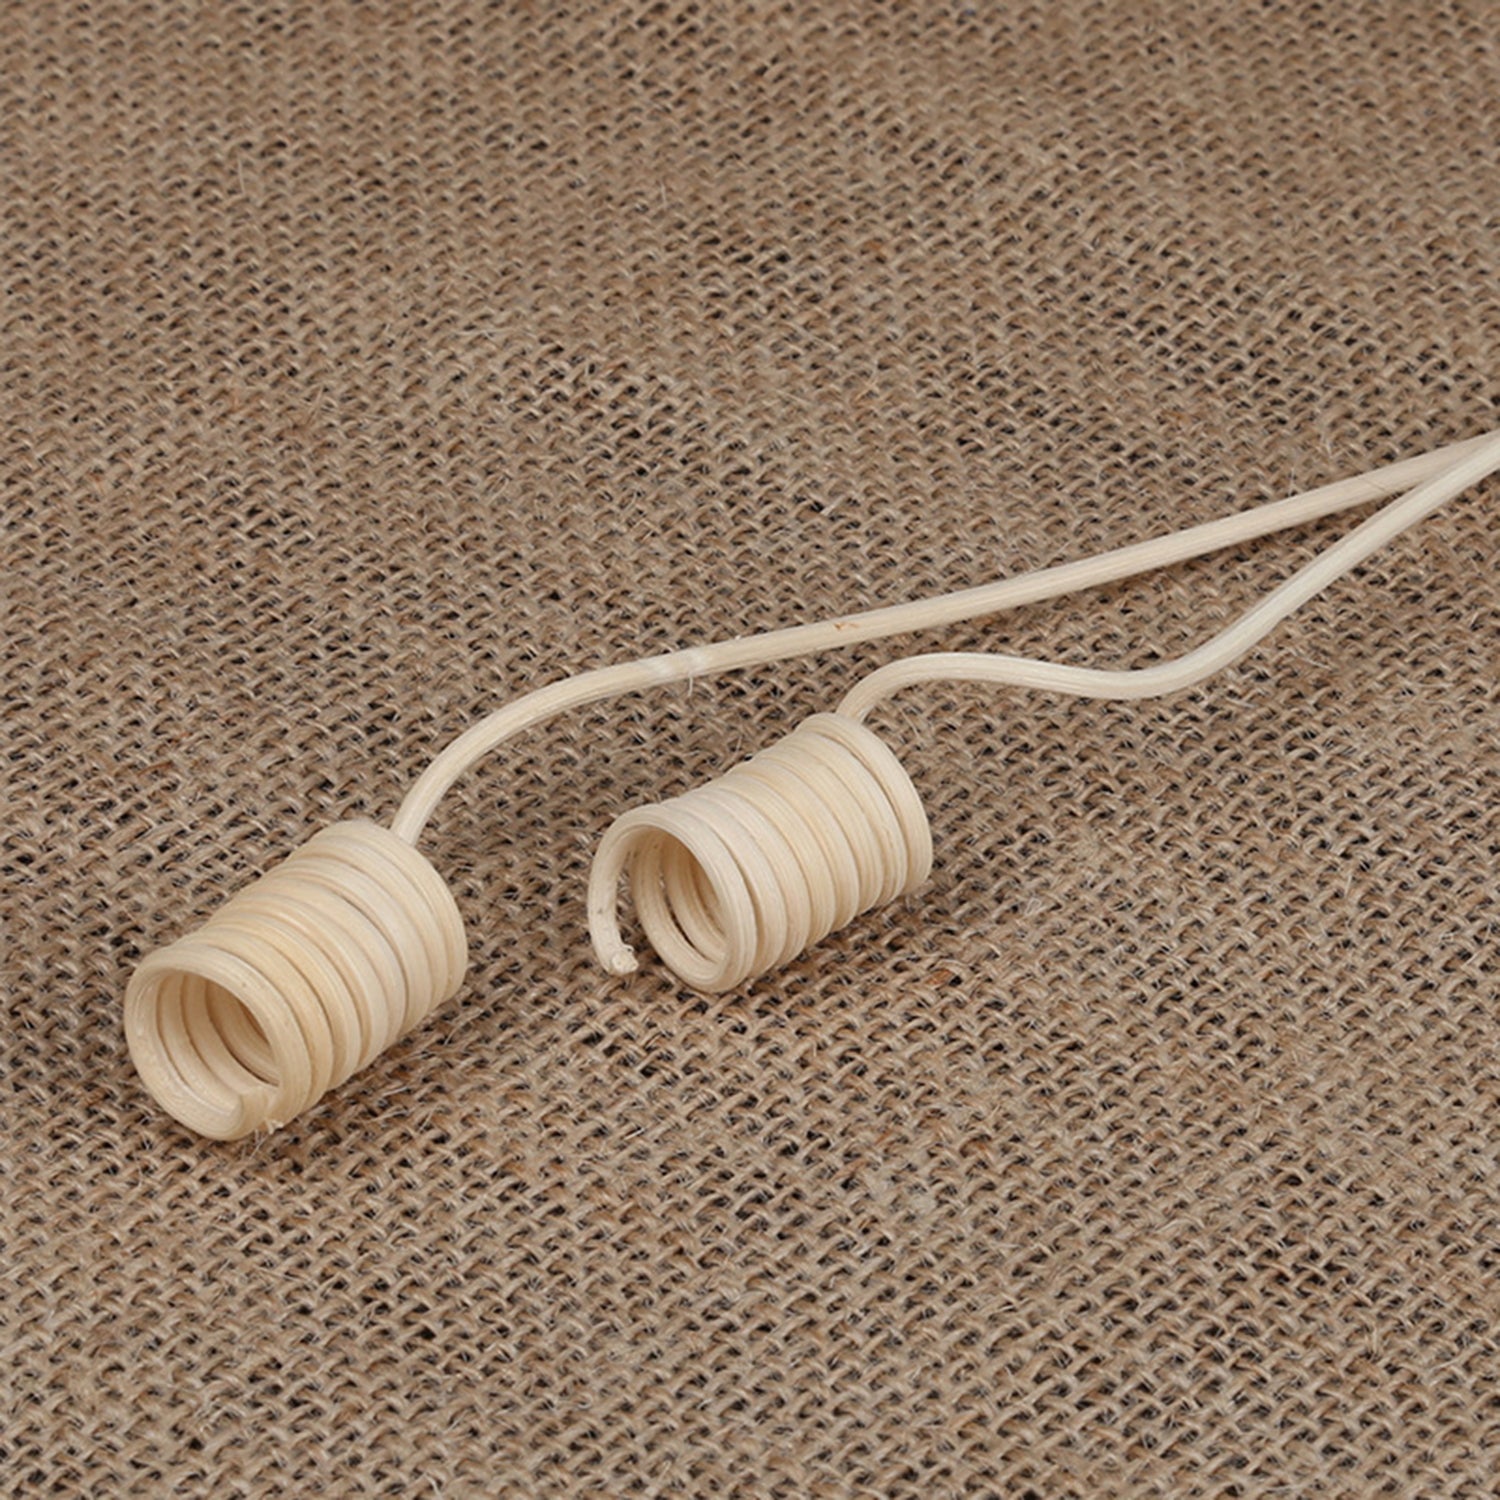 Rattan Reed Sticks Special Waving Rolled Rattan Stick/Ball For Reed Diffuser Reed Diffuser Accessories OEM Long Curl Head 